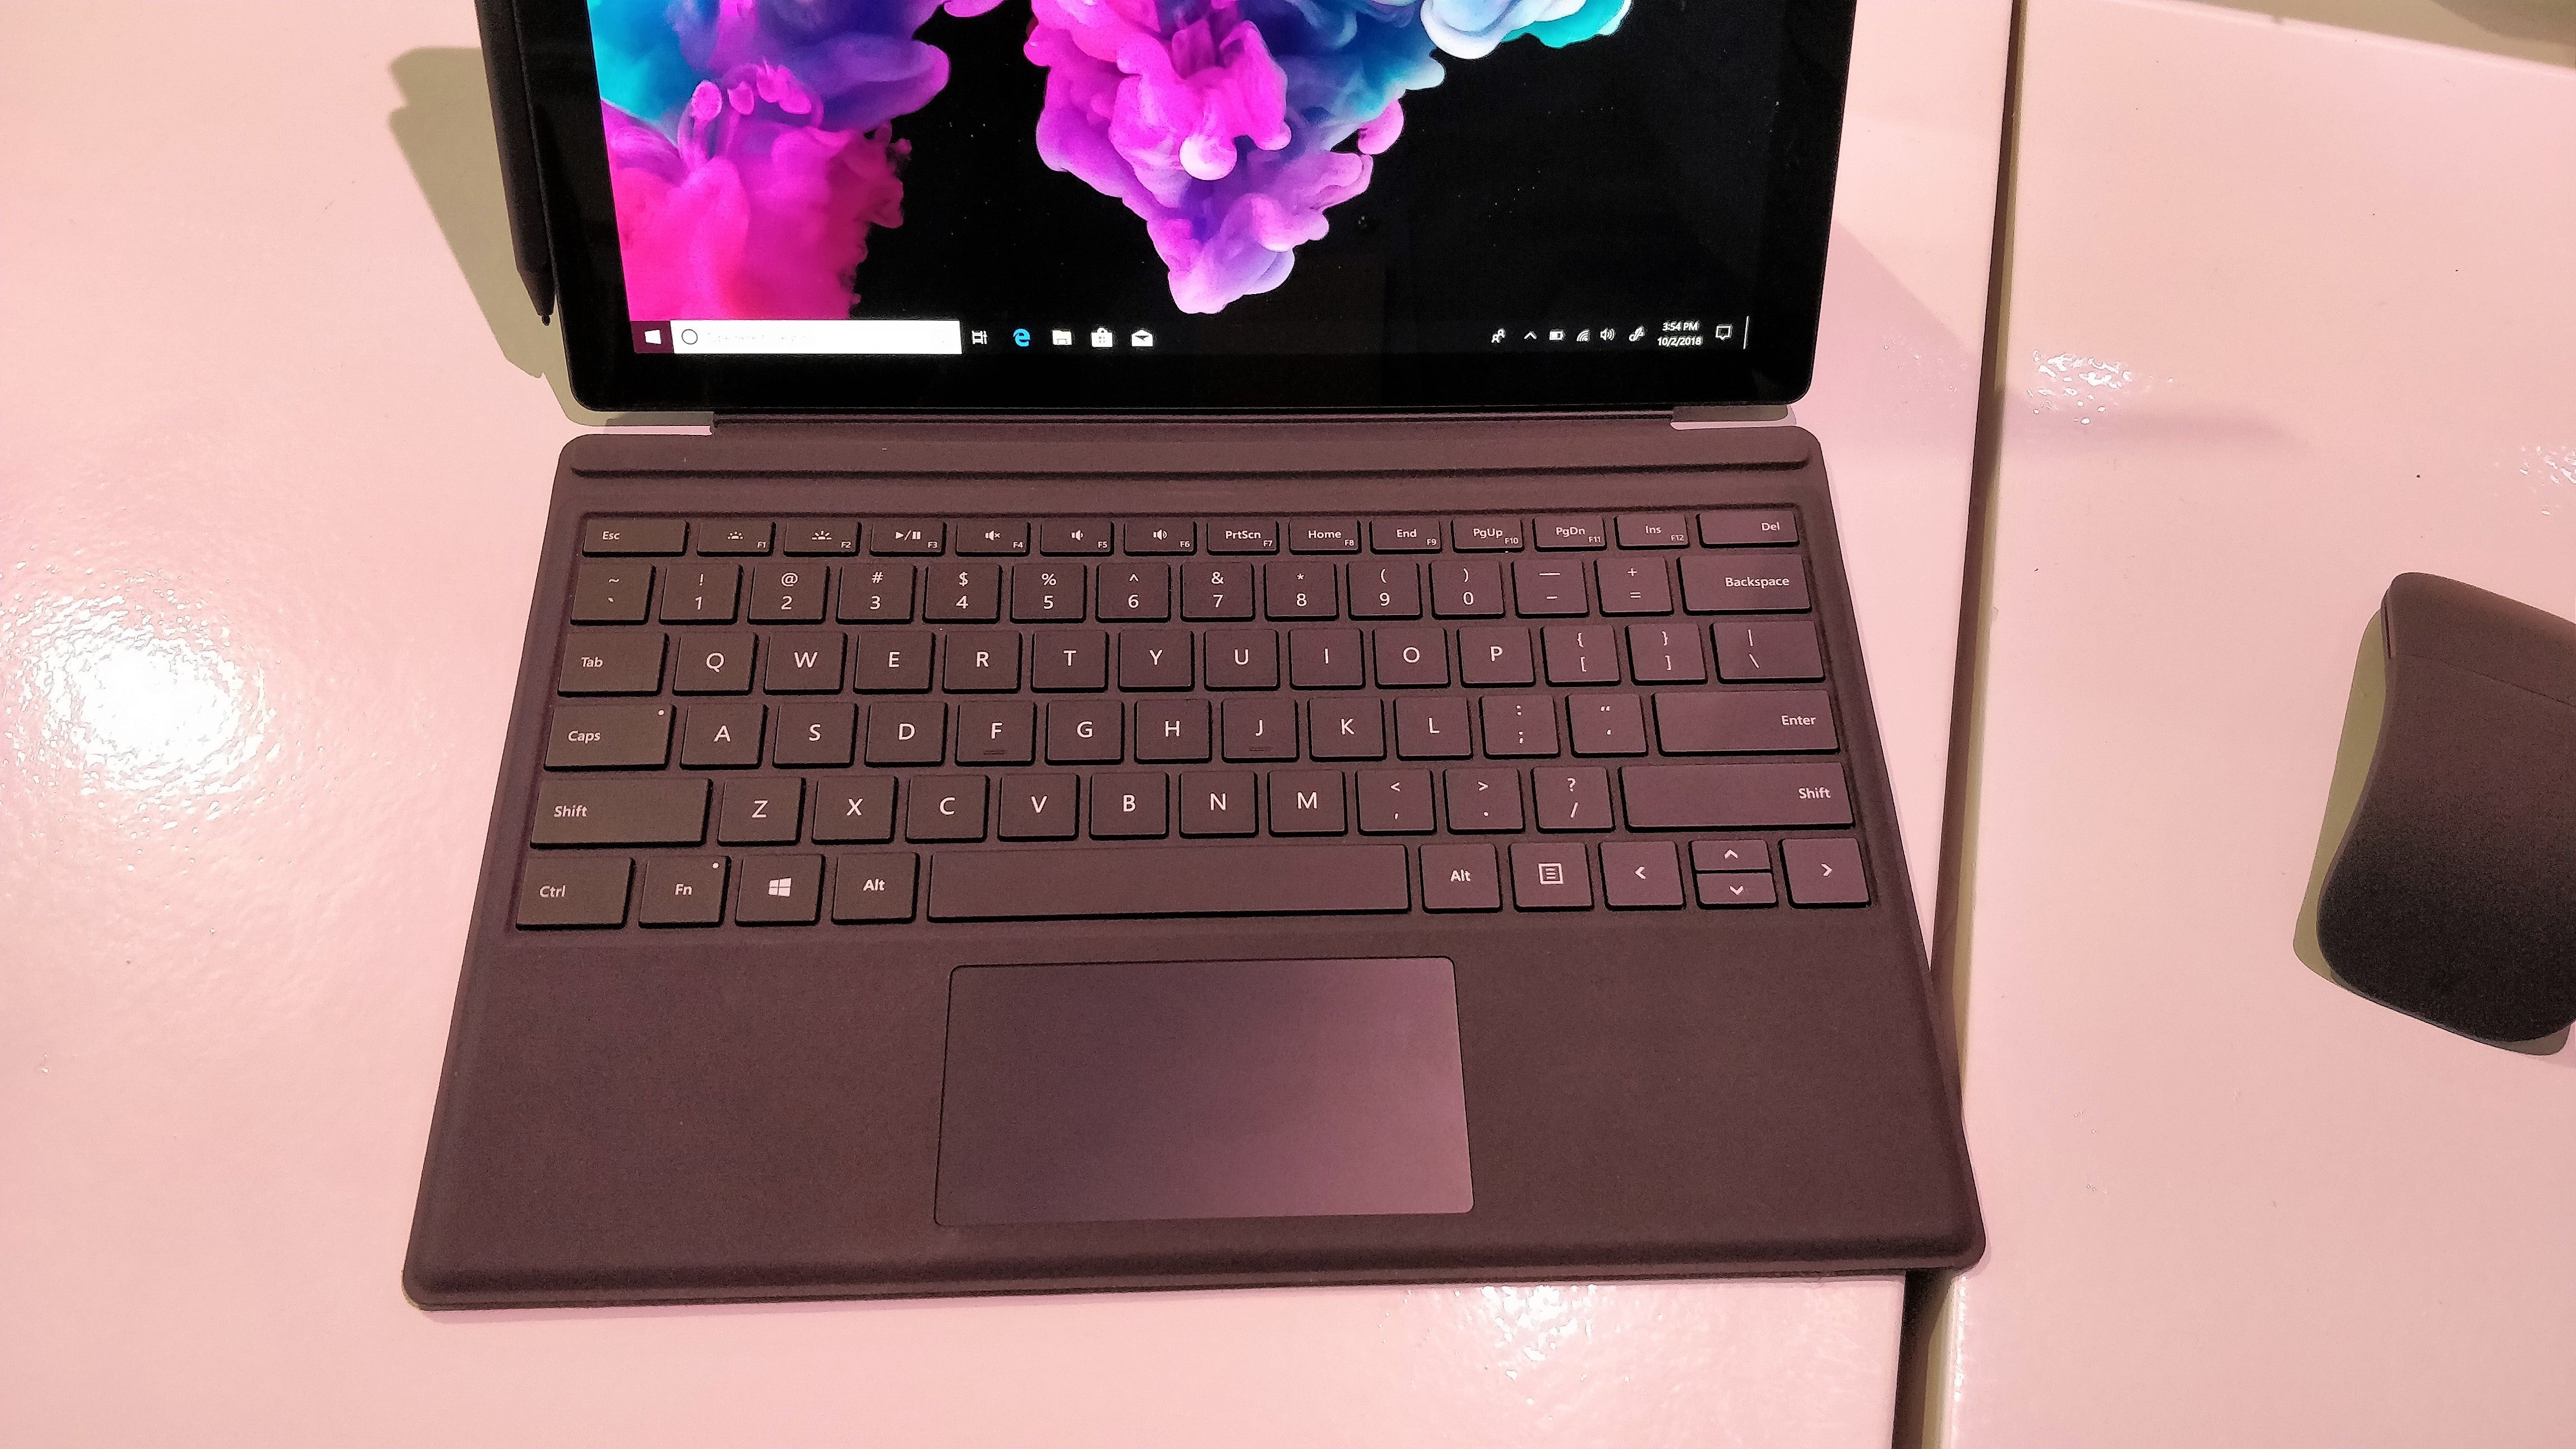 Hands on with Microsoft's Surface Pro 6 The new tablet is easy to use